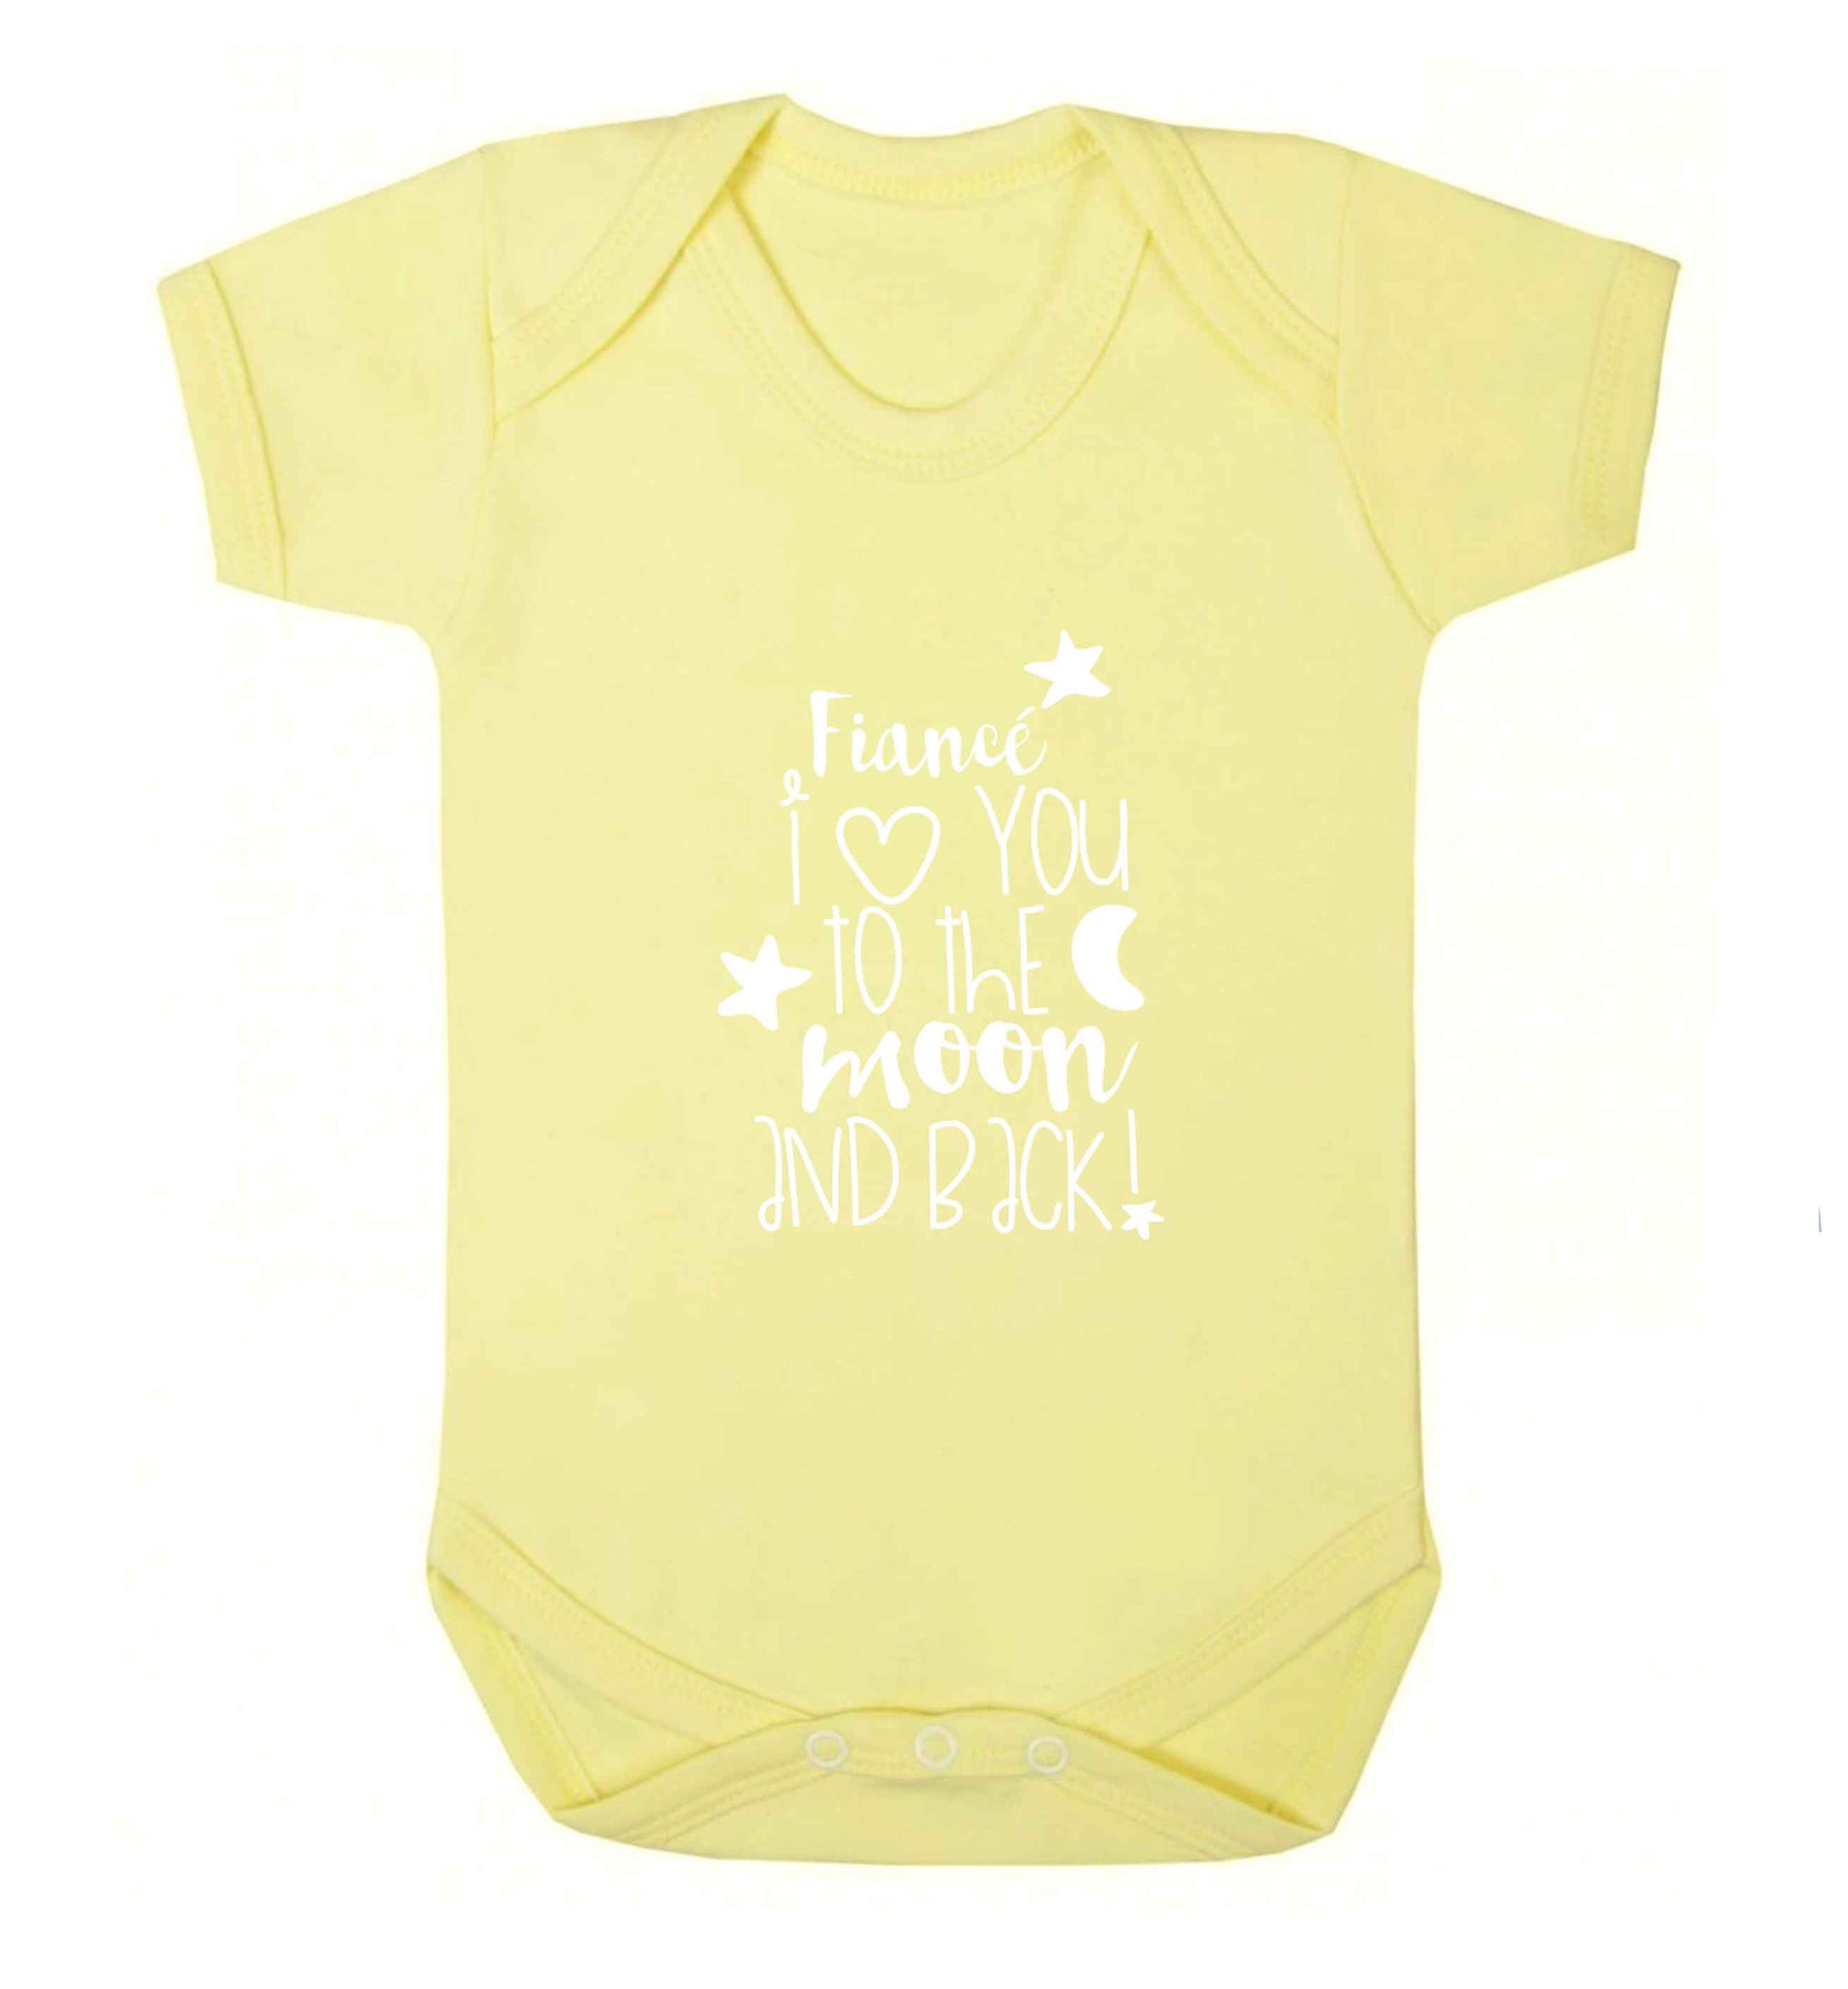 Fianc√© I love you to the moon and back baby vest pale yellow 18-24 months